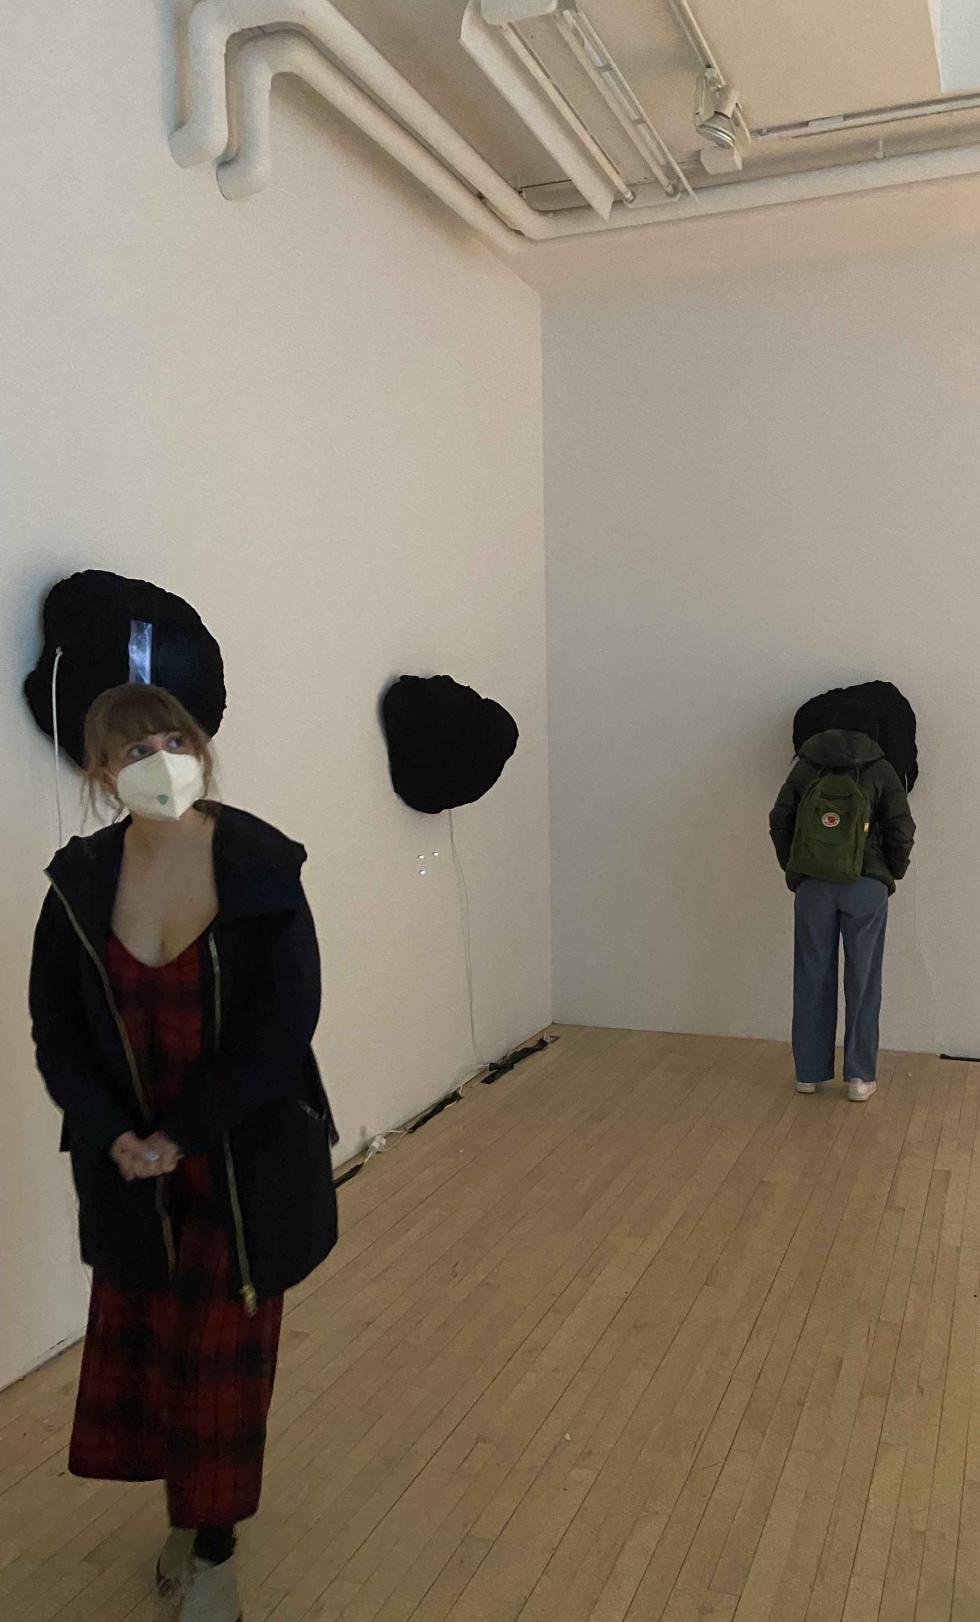 Inside a gallery with white walls and light wood floors, a person stands with their back to the camera and looks closely at a black mass sculpture affixed to the wall. Facing the camera and looking across the gallery is a person wearing a red dress, black sweater, and white face mask. 